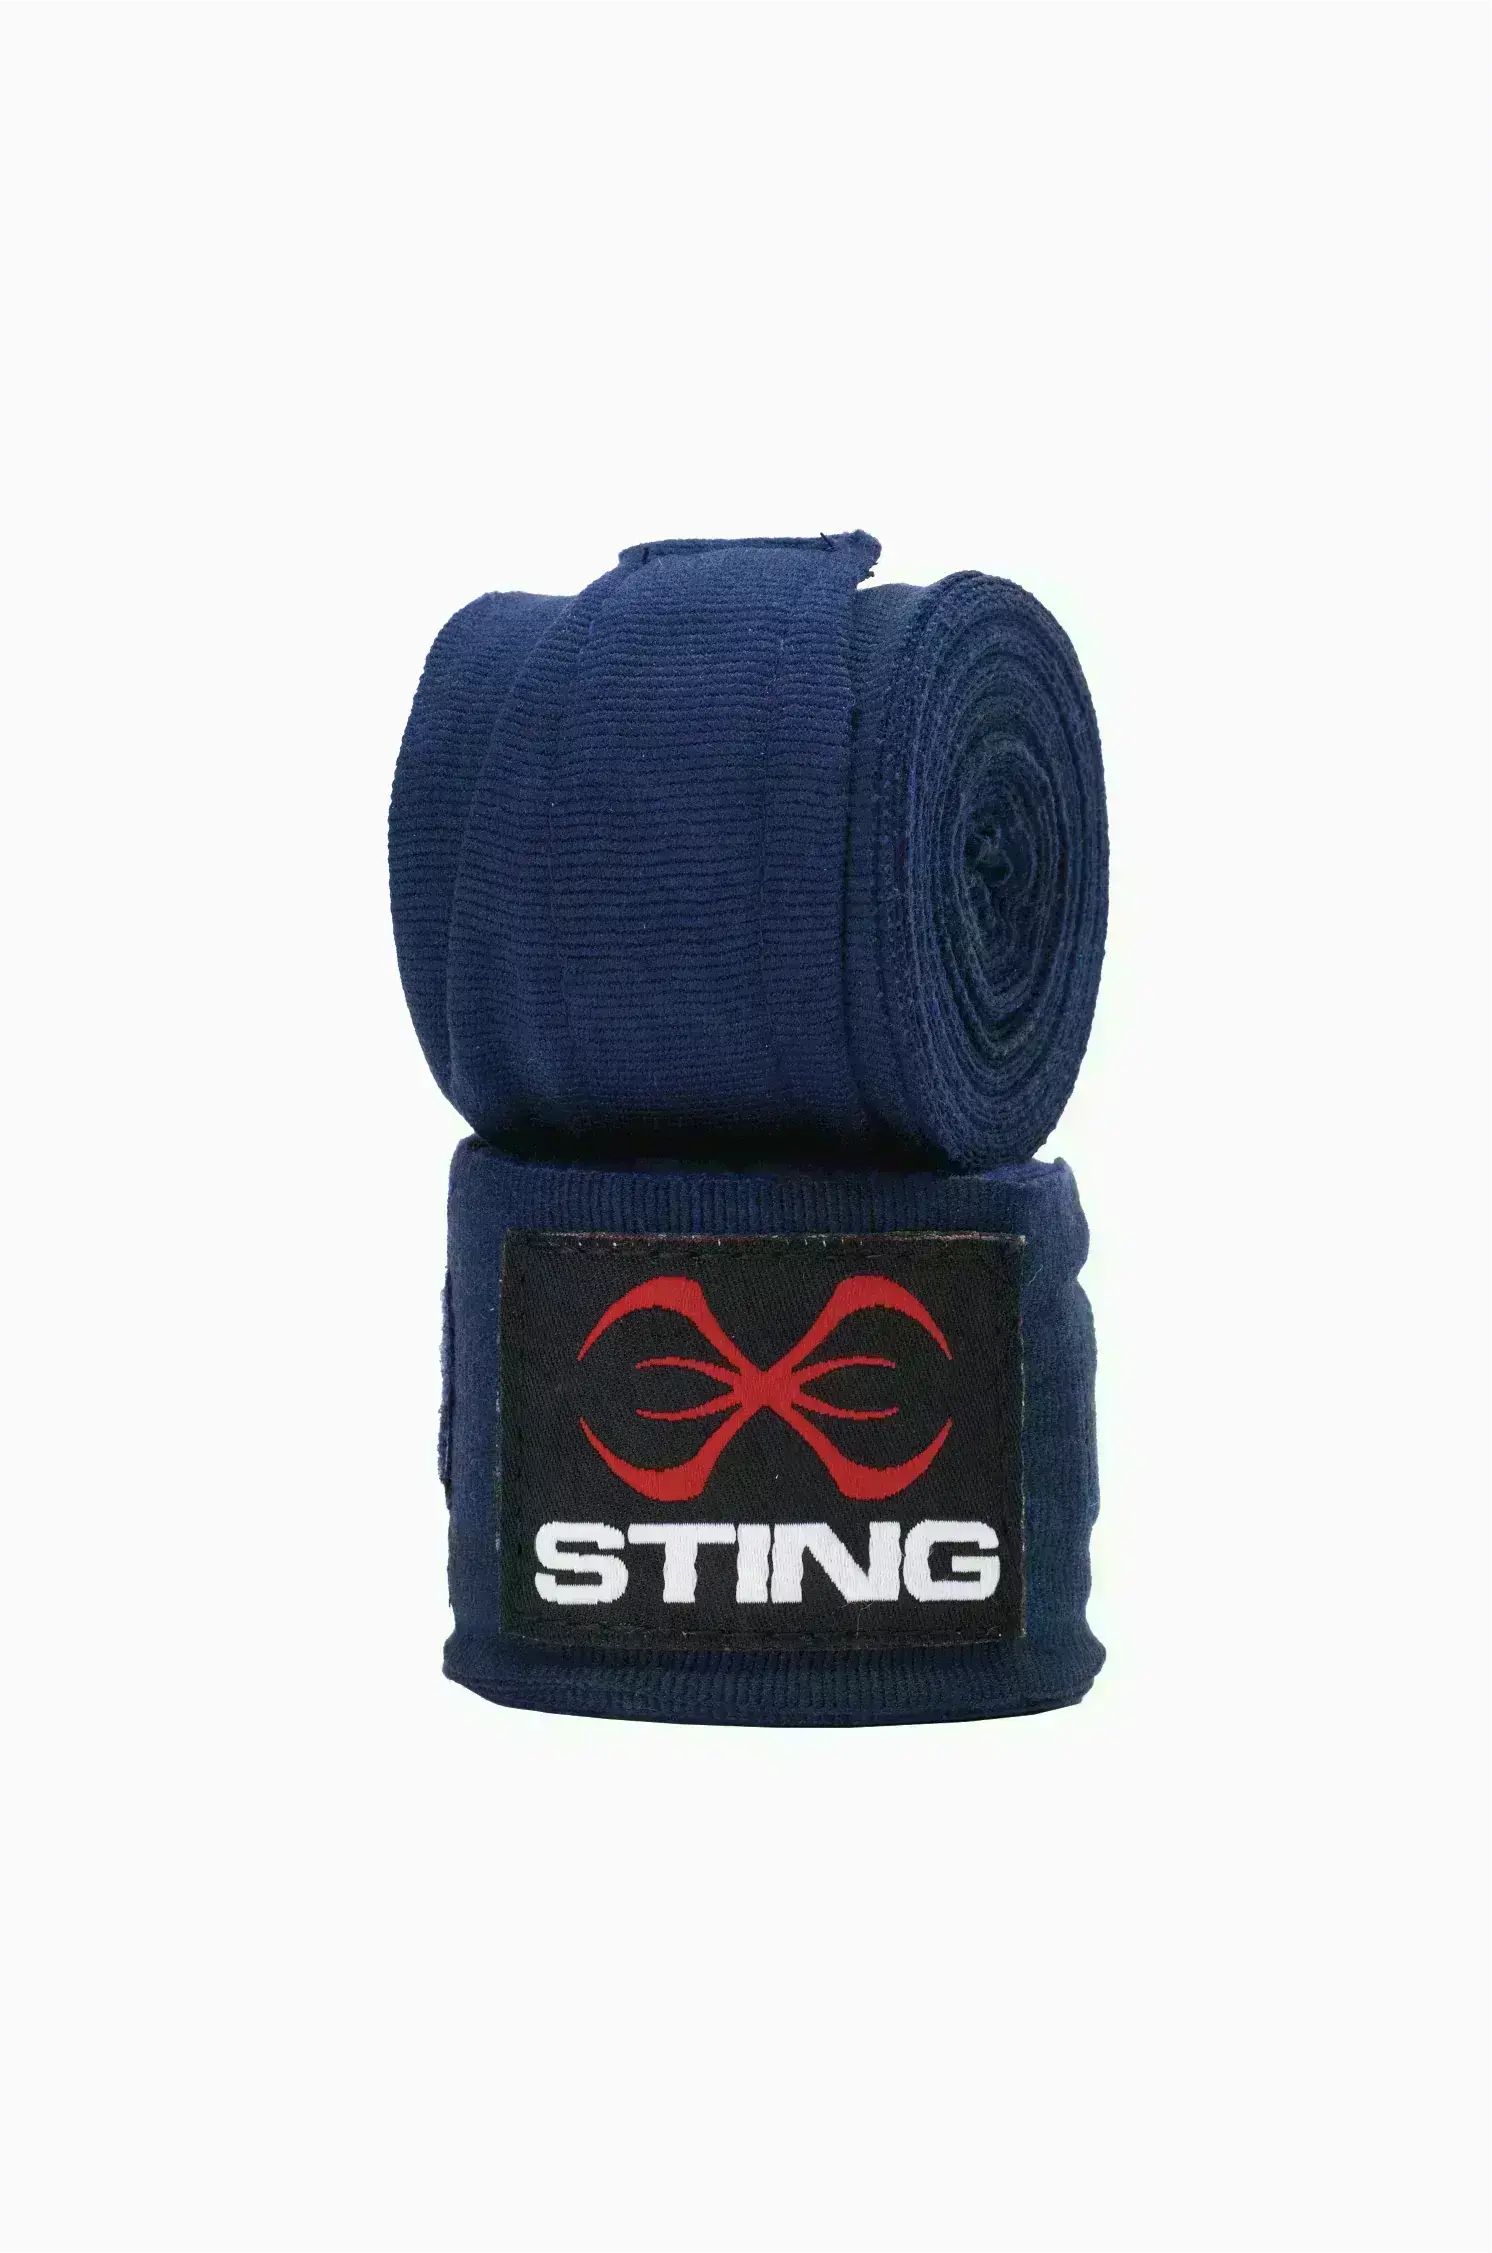 Sting Elasticicated Hand Wraps Navy-4.5m Fight Co